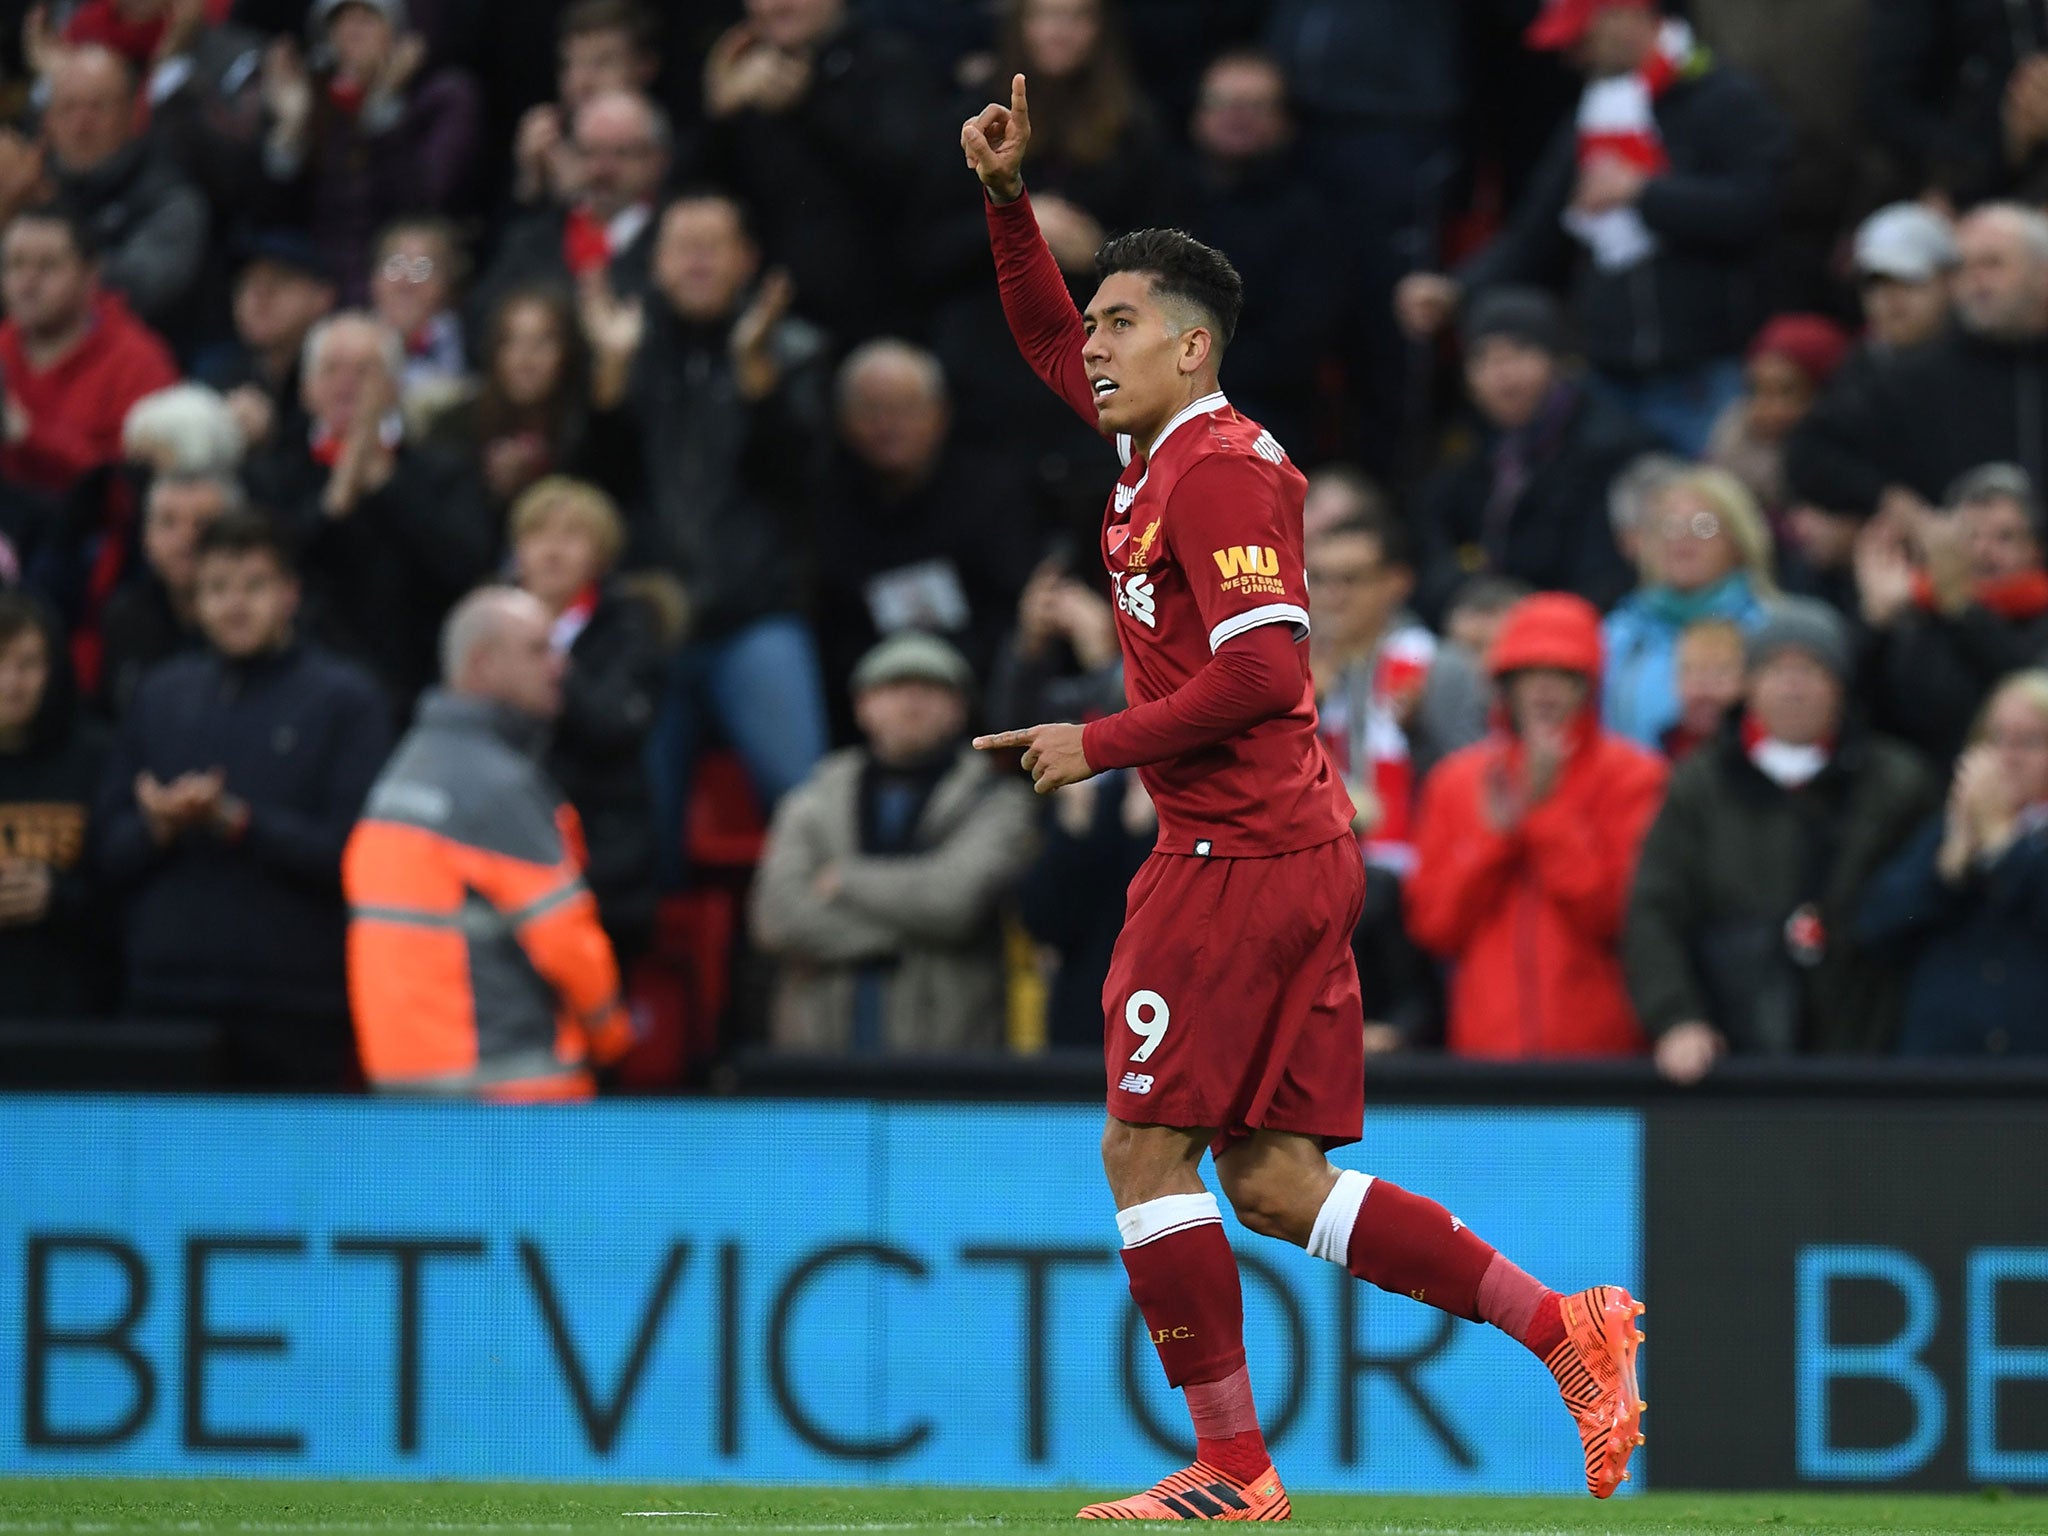 Roberto Firmino added Liverpool's second just before the hour mark